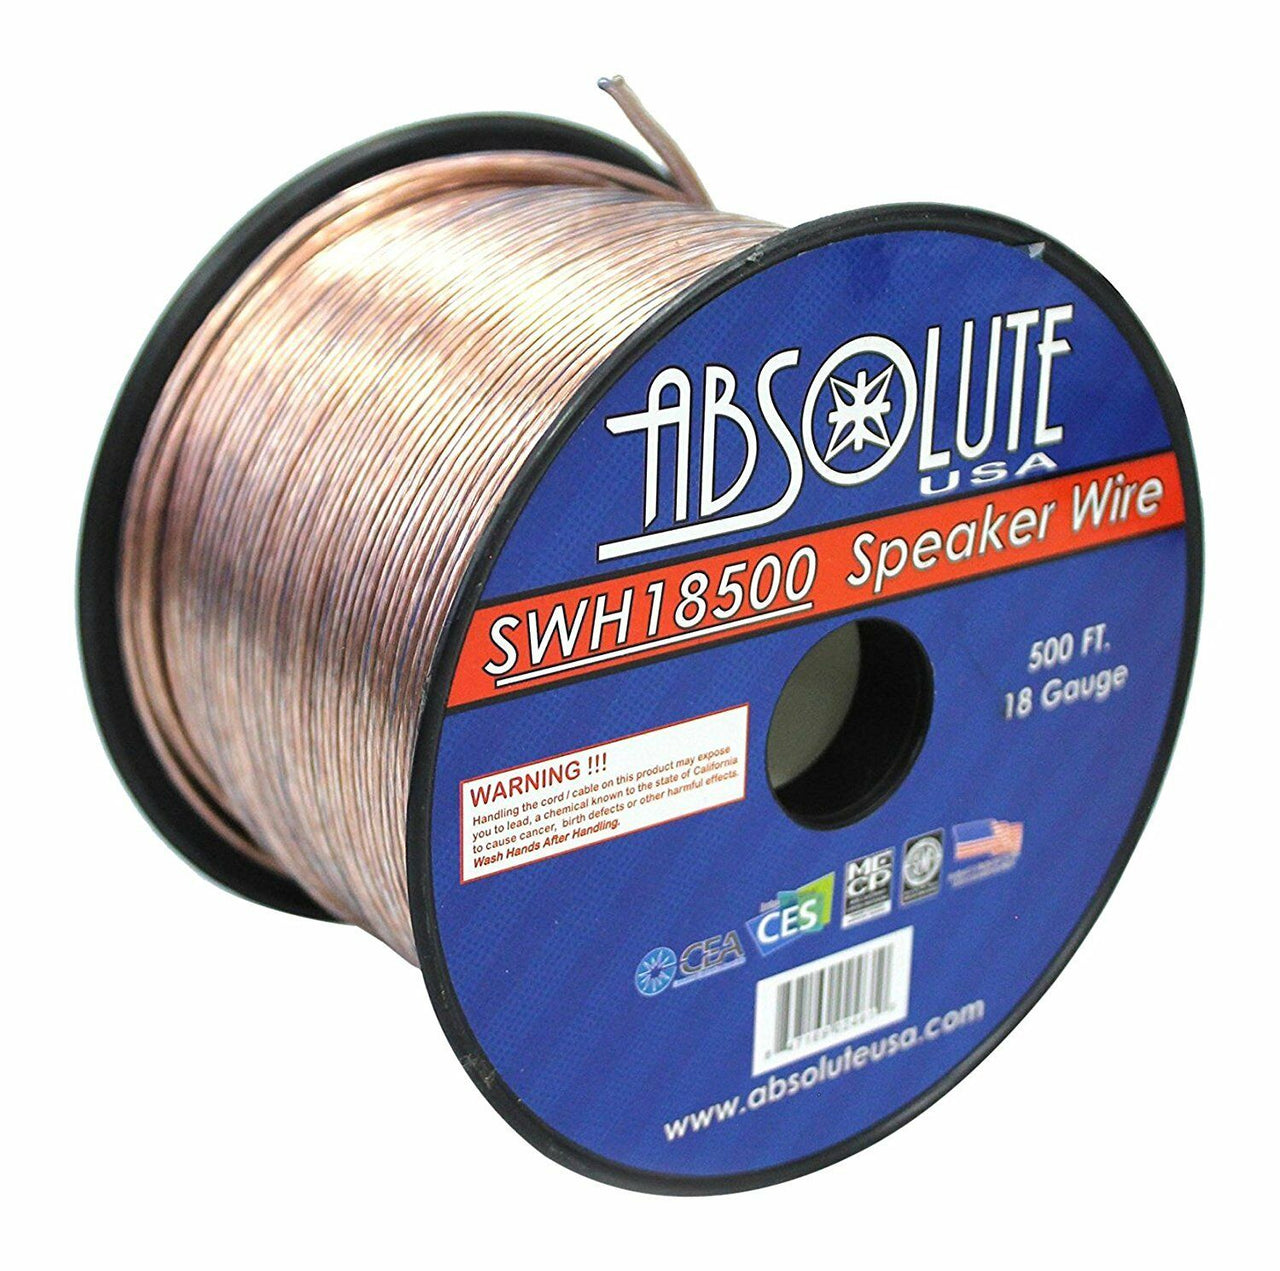 Absolute USA SWH181000 1000' 18 Gauge Speaker Wire<br/>1000 Feet 18 Gauge Car Audio Stereo Home Theater Marine ATV Speaker Wire Transparent Clear Cable Soft Touch Cable